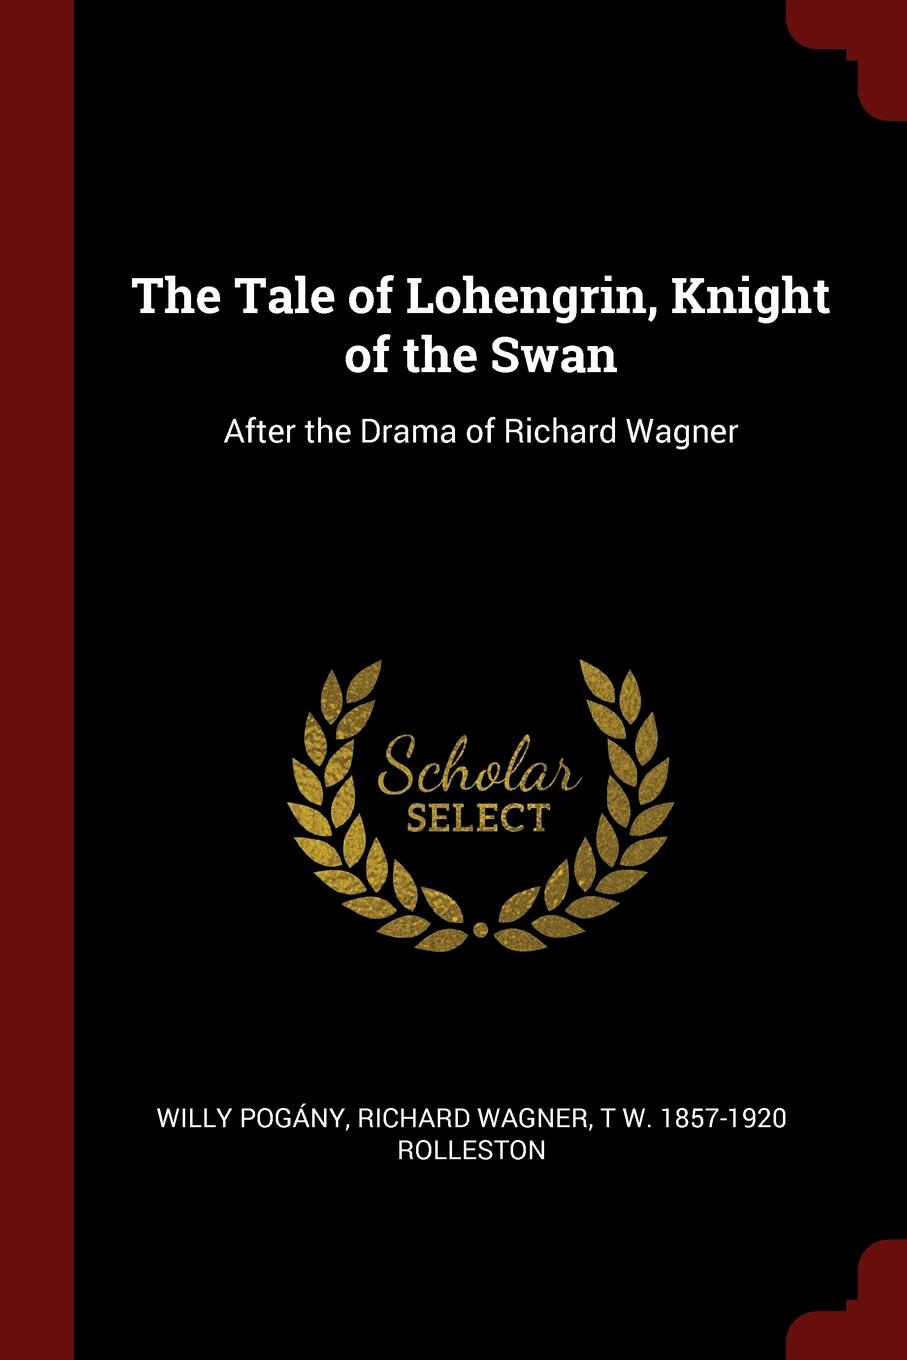 The Tale of Lohengrin, Knight of the Swan. After the Drama of Richard Wagner